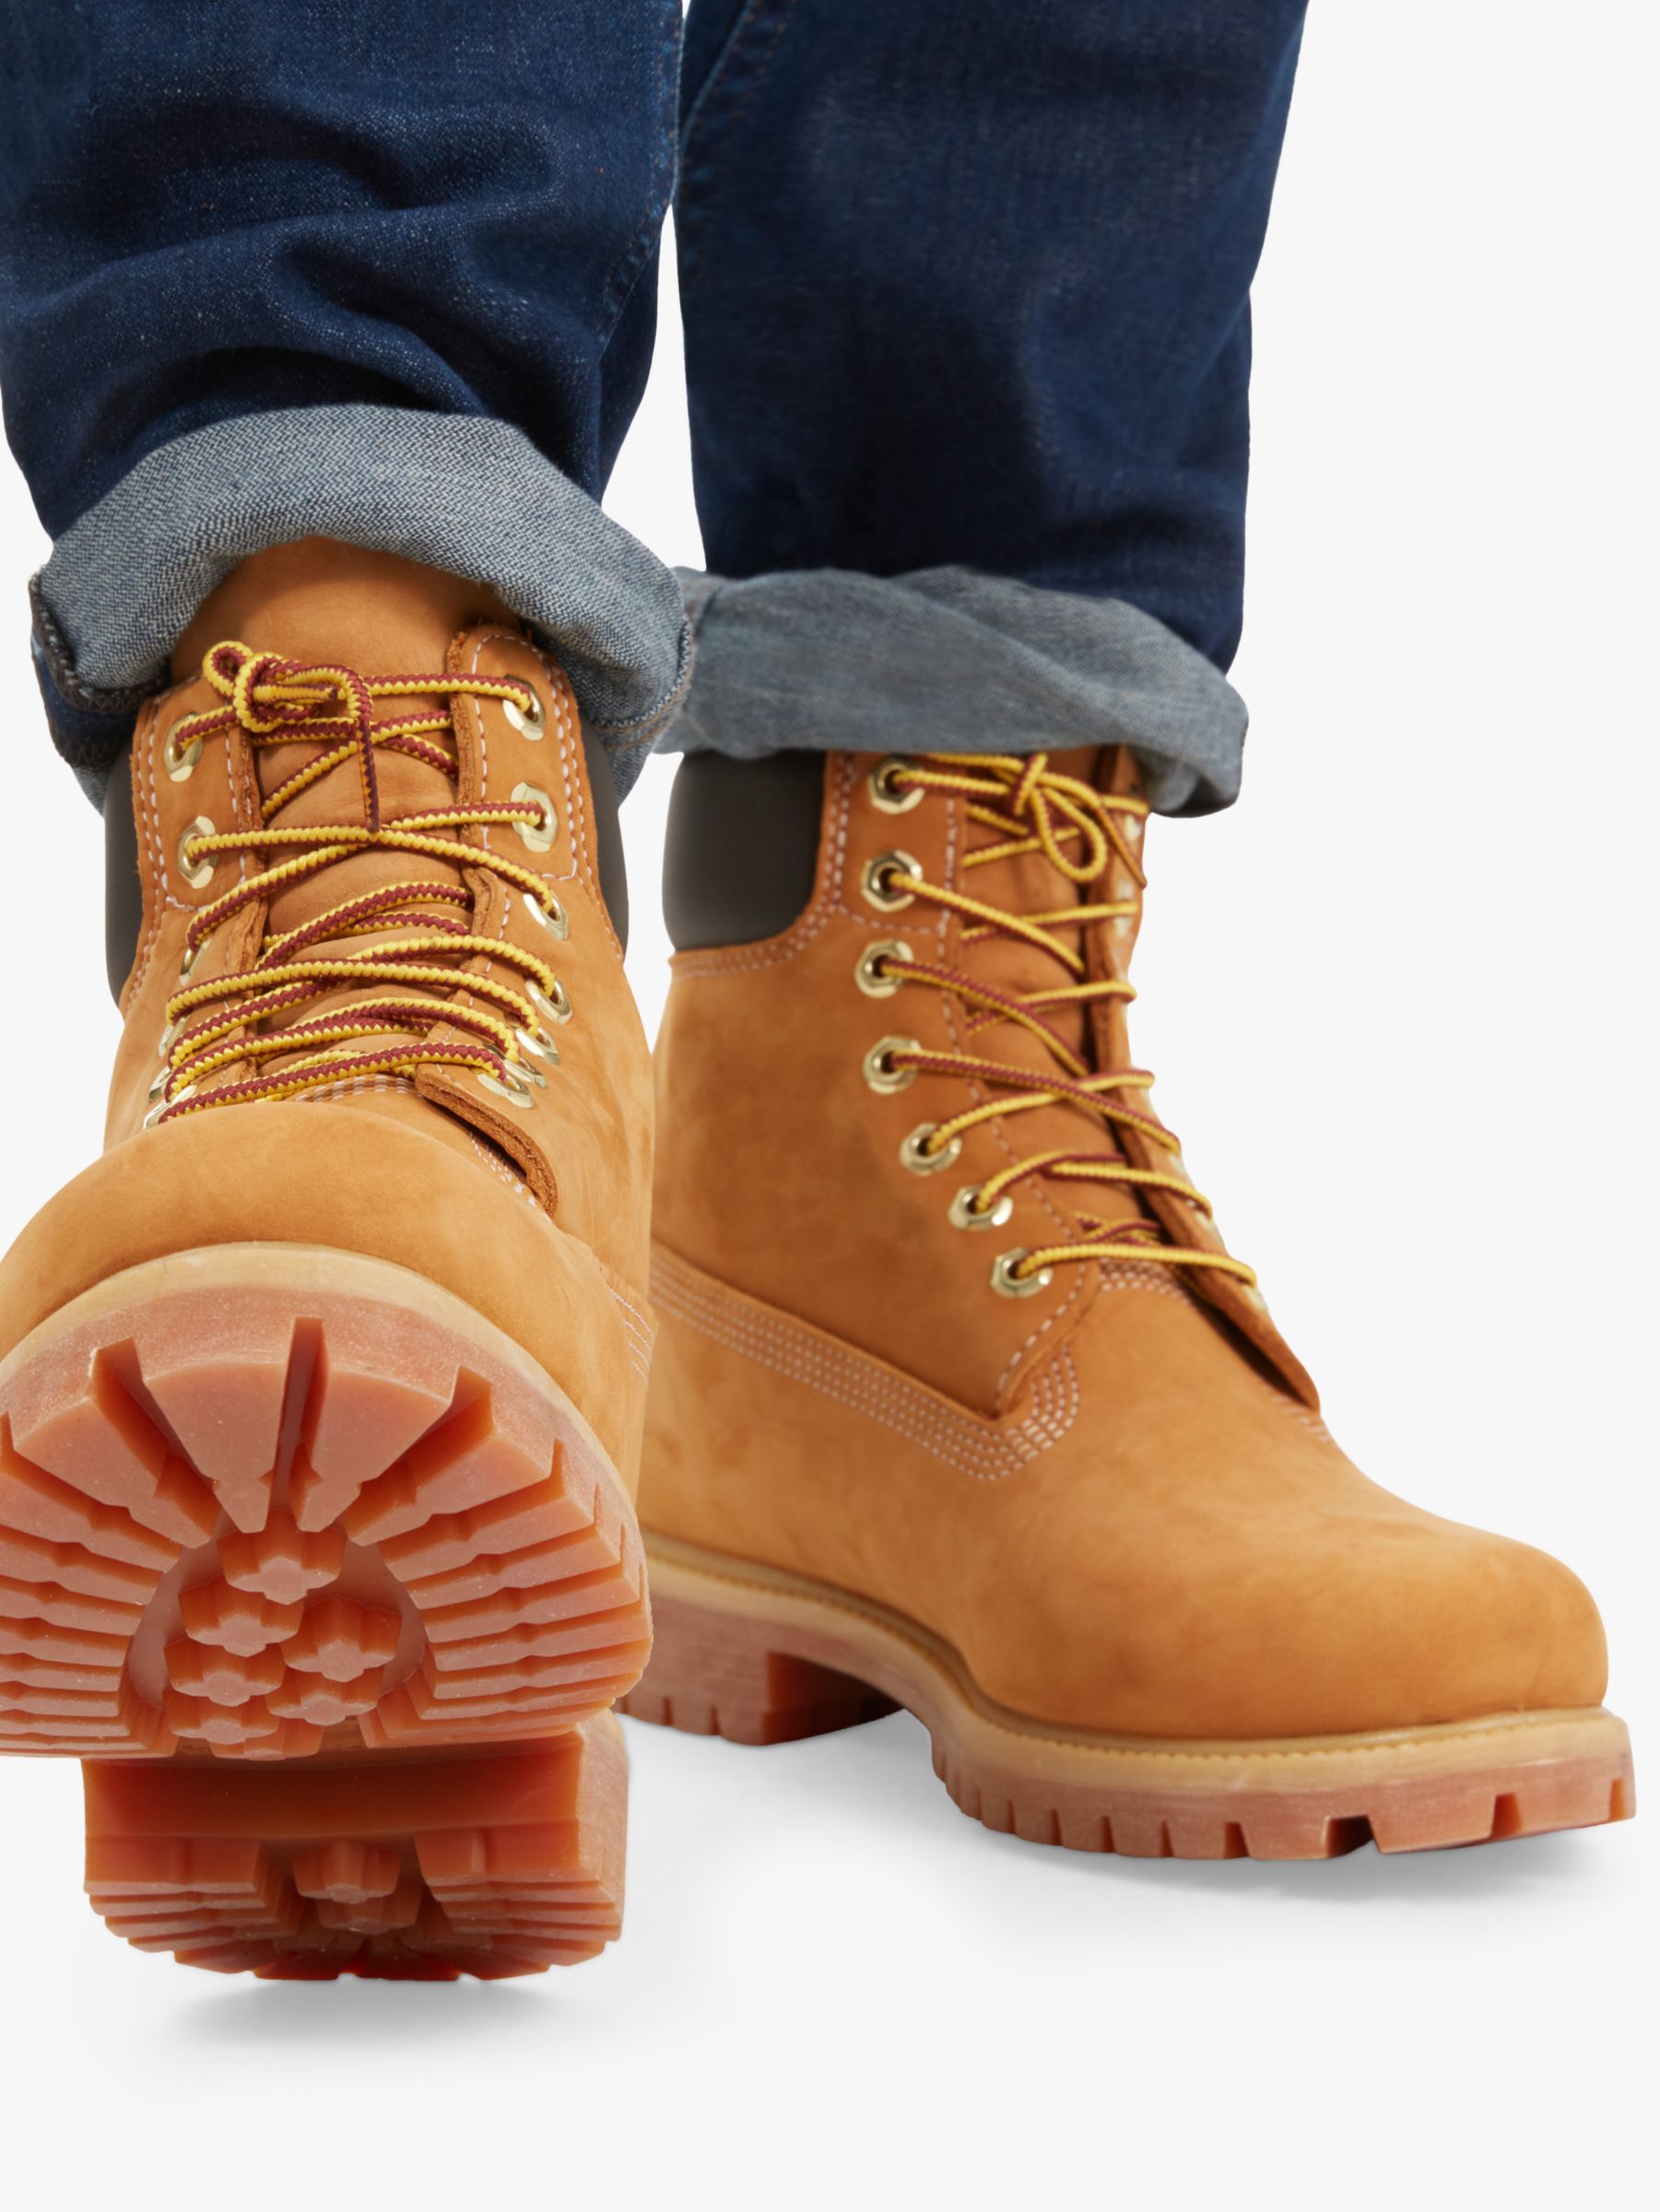 Timberland 6-Inch Premium Boots, Yellow at John Lewis & Partners